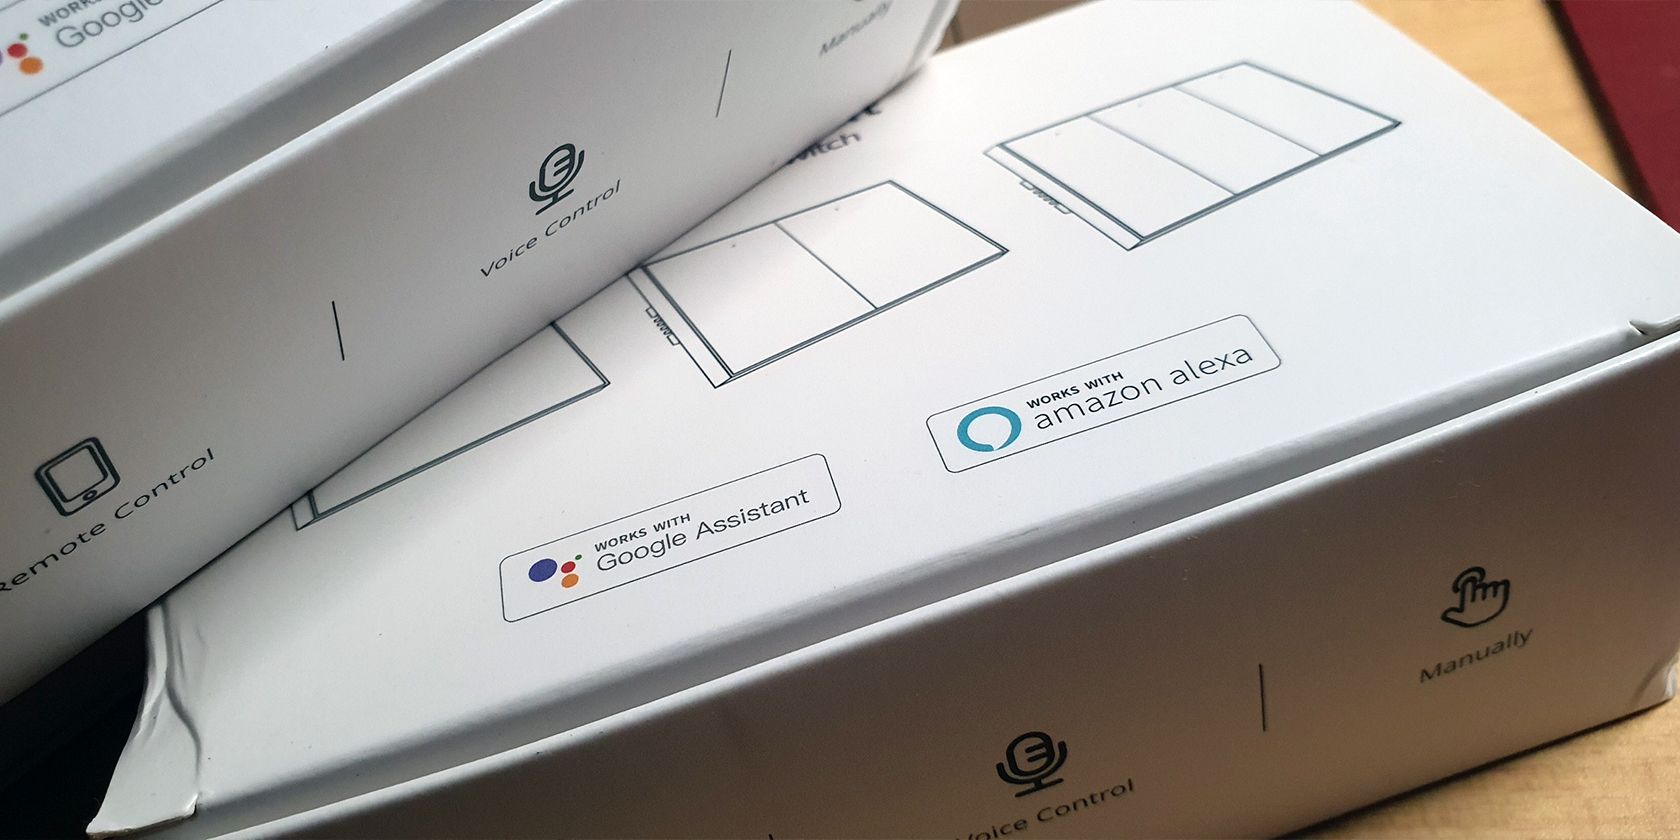 Google Assistant and Amazon Alexa certifications on a box for a smart device